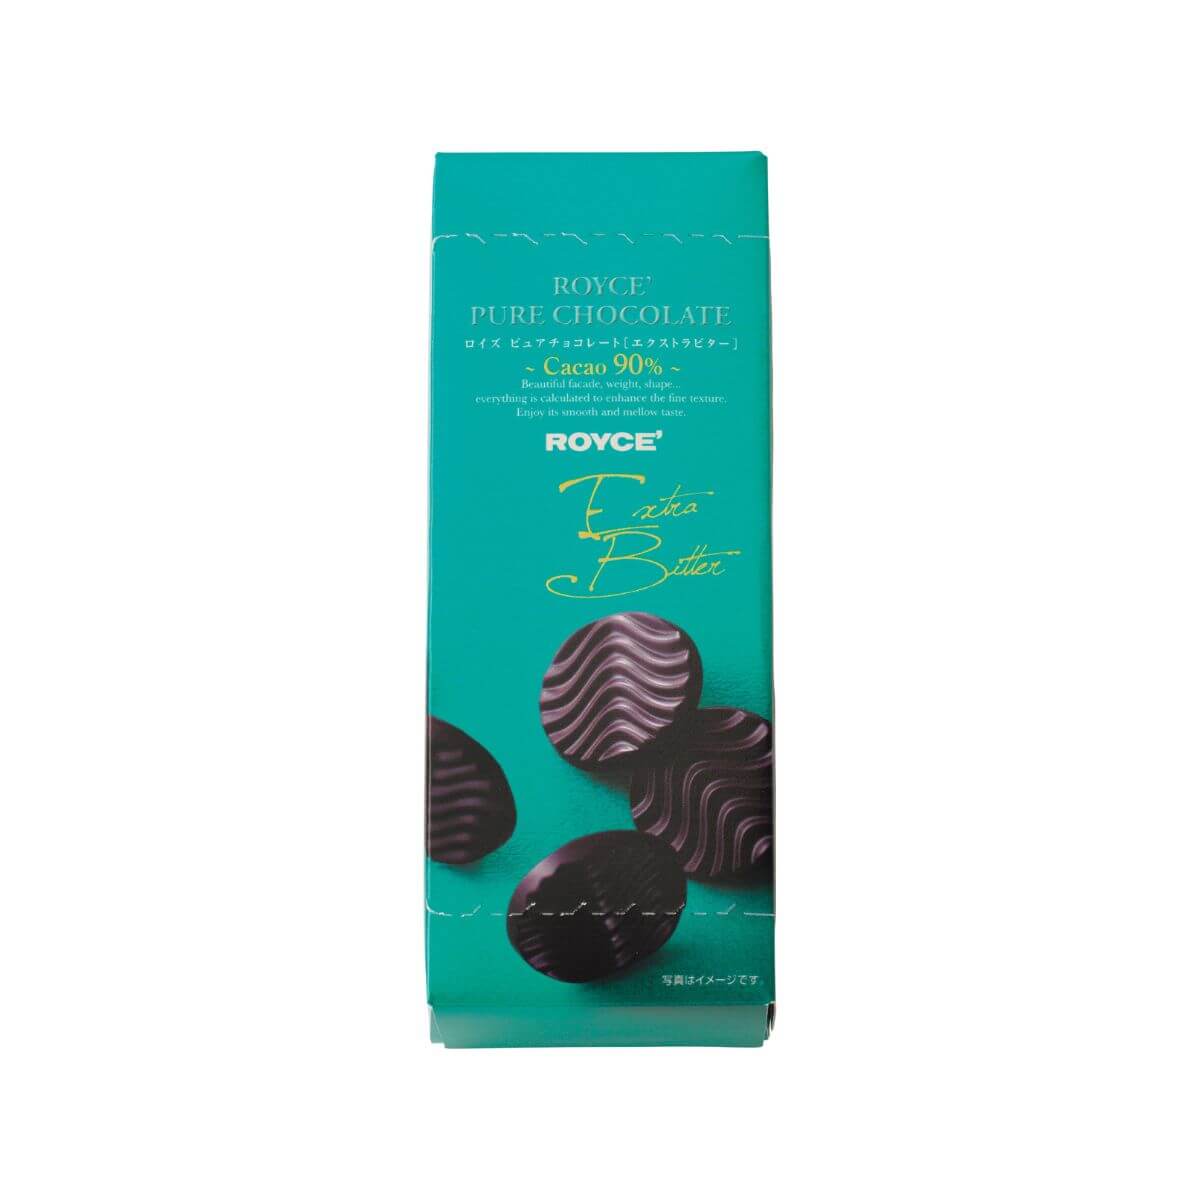 ROYCE' Chocolate - Pure Chocolate "Extra Bitter" - Image shows a blue-green box with pictures of dark chocolate discs. Text on front: ROYCE' Pure Chocolate Cacao 90% Beautiful facade, weight, shape... everything is calculated to enhance the fine texture. Enjoy its smooth and mellow taste. ROYCE'. Extra Bitter. Text on right side: ROYCE' Pure Chocolate. Extra Bitter.